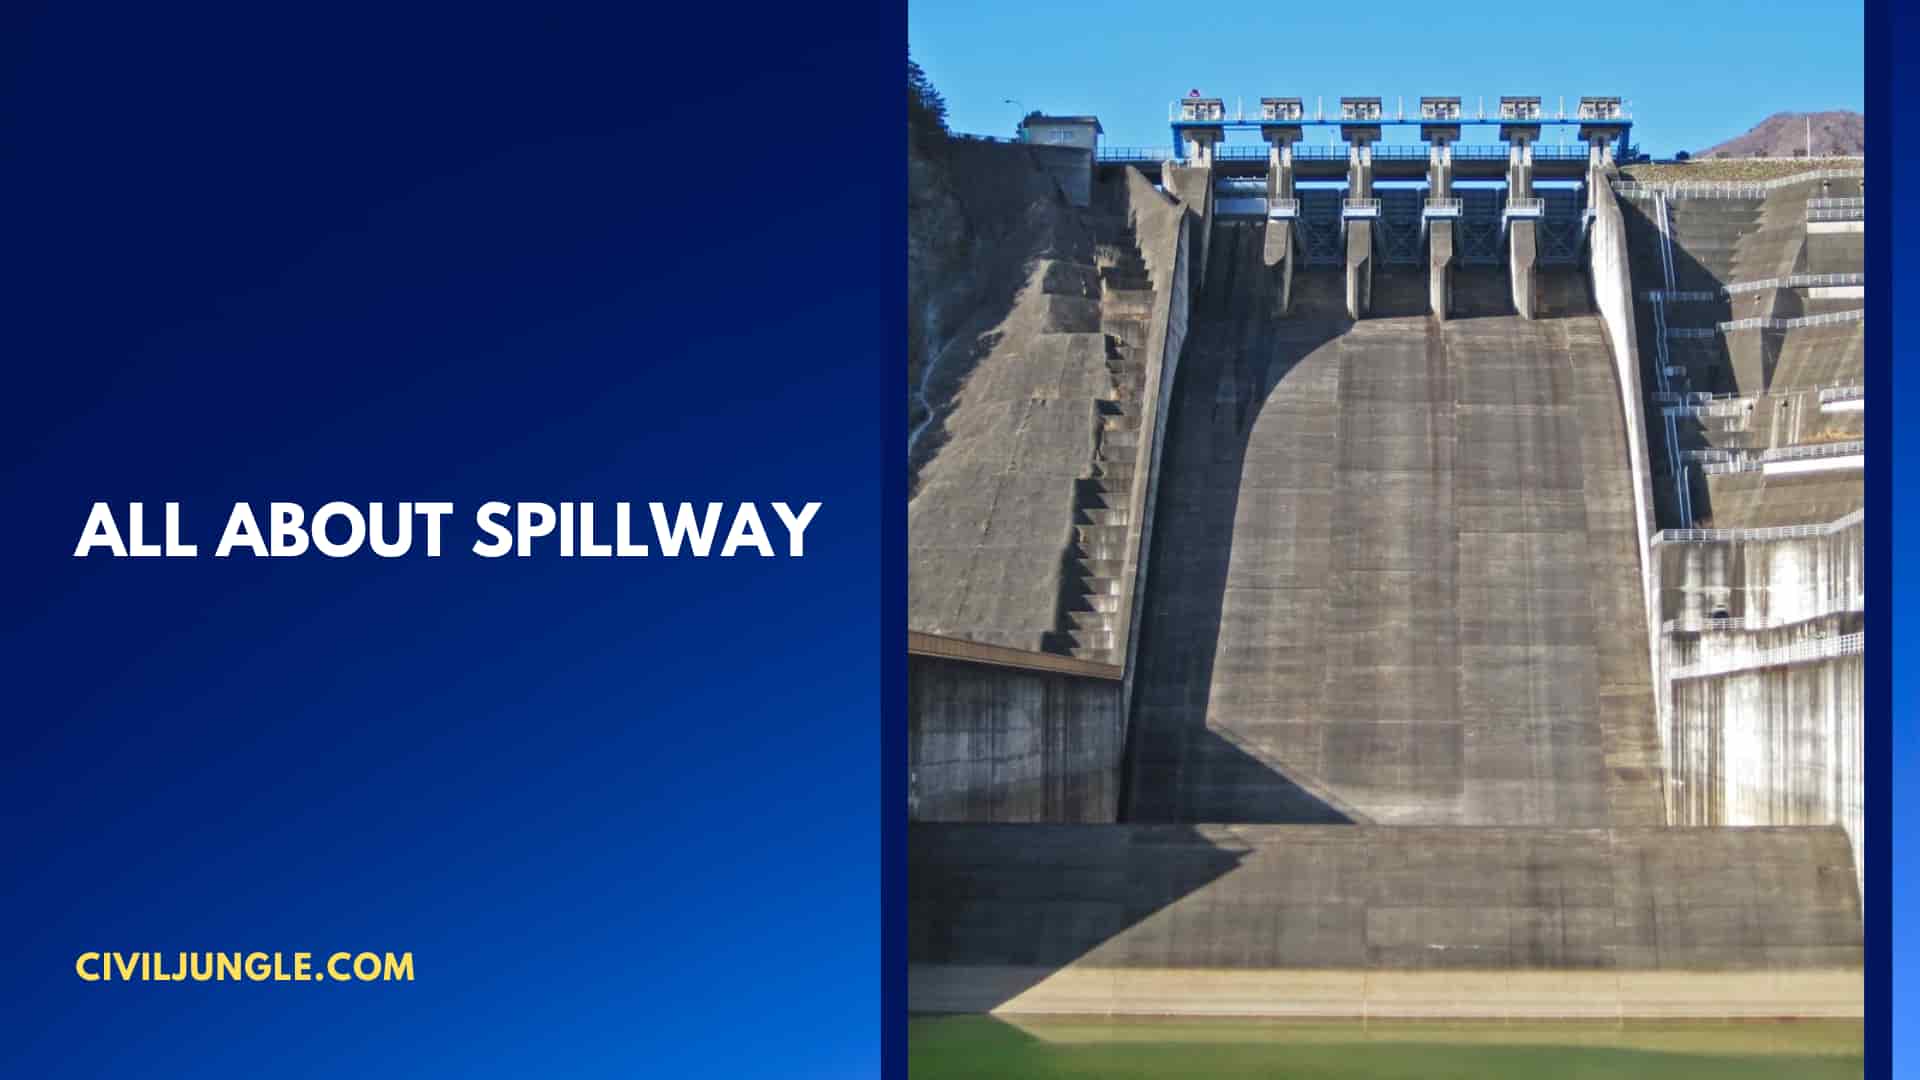 All About Spillway